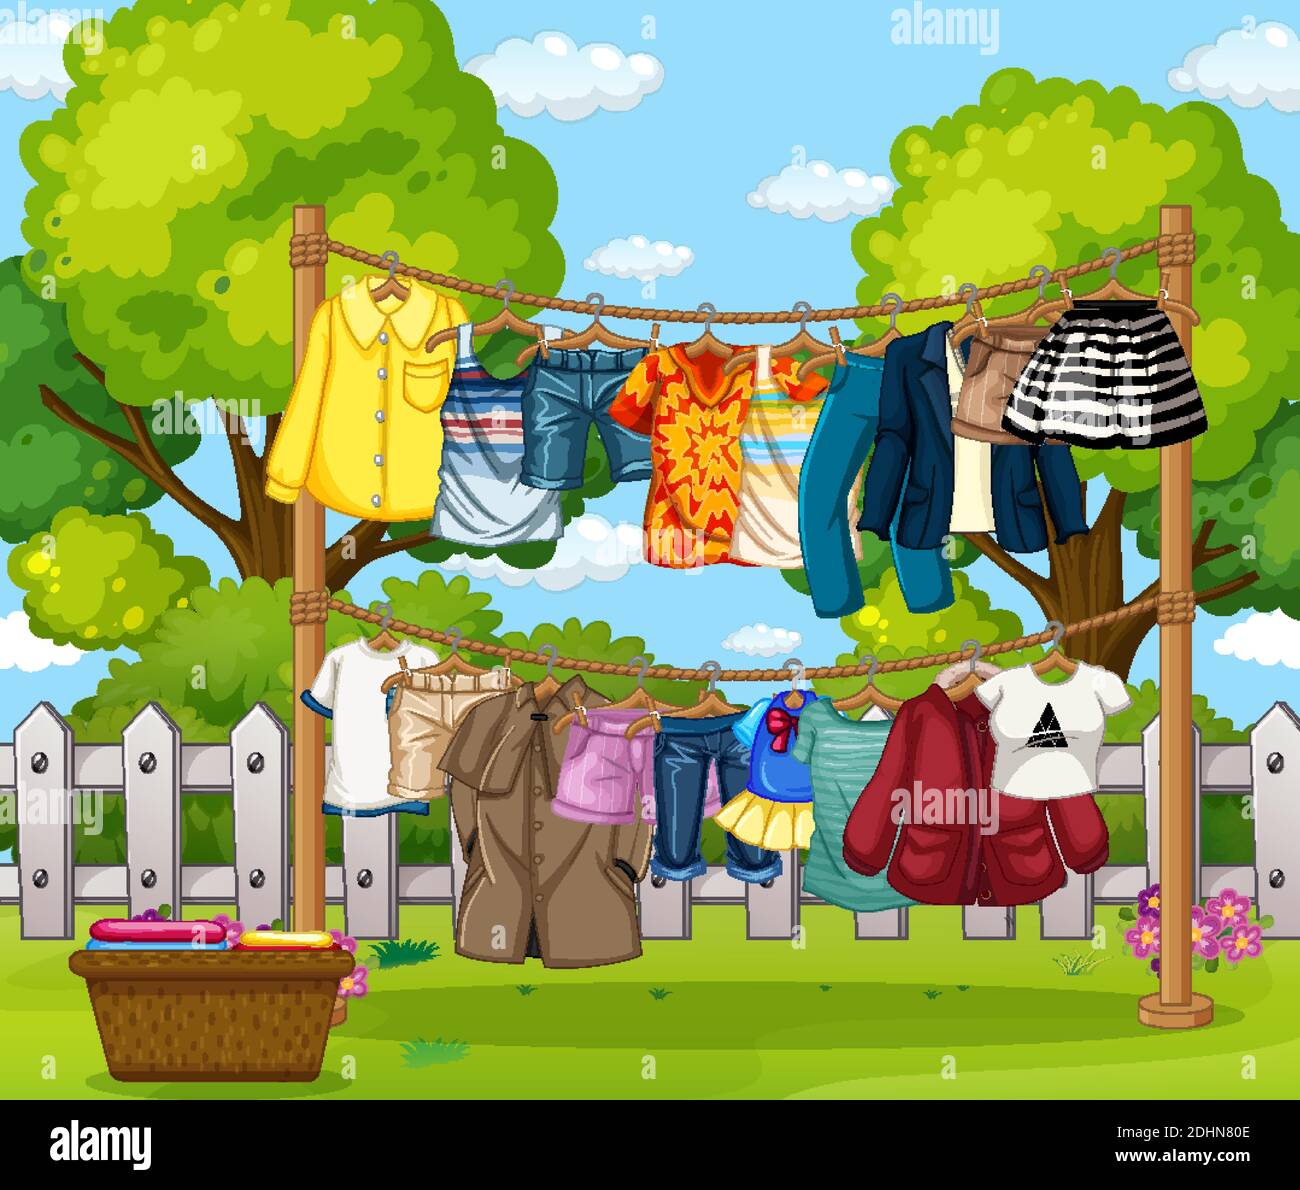 Many clothes hanging on a line outside the house scene illustration Stock Vector